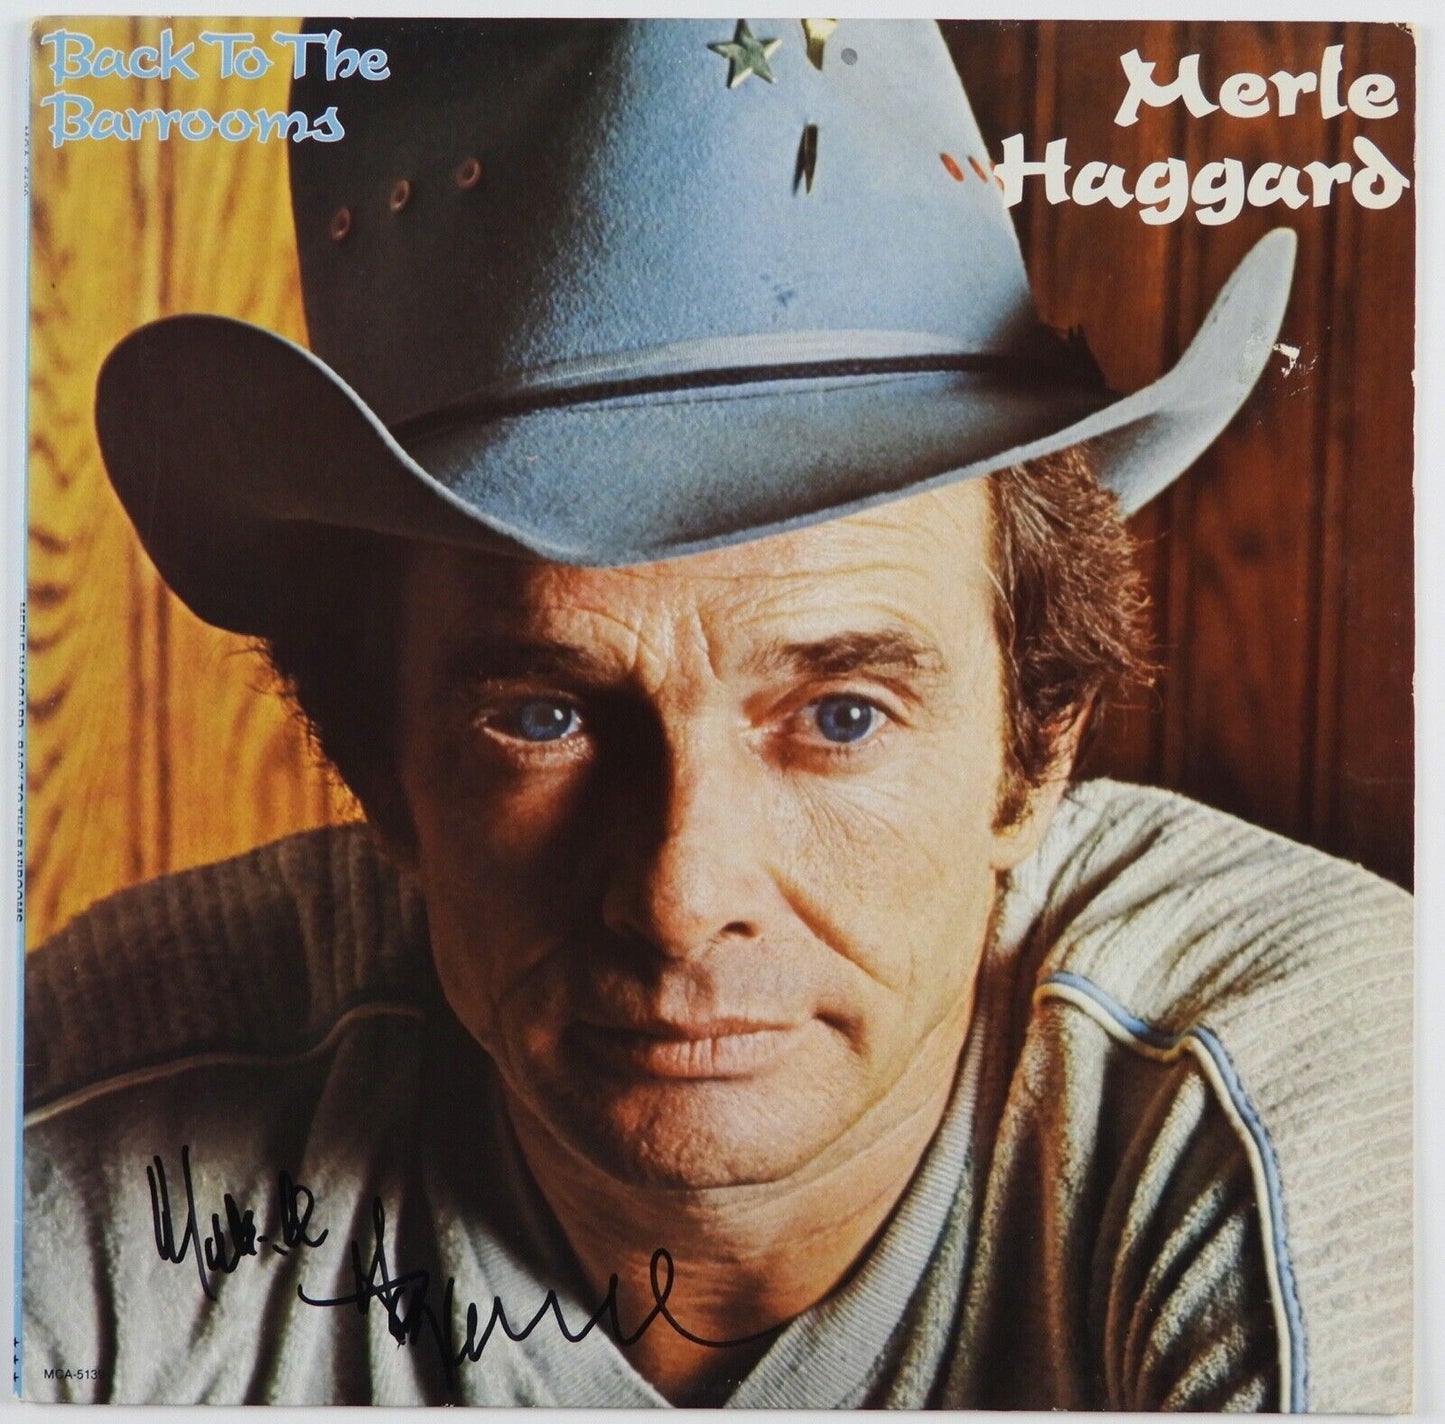 Merle Haggard Signed Autograph Album JSA Record V Back To The Barrooms